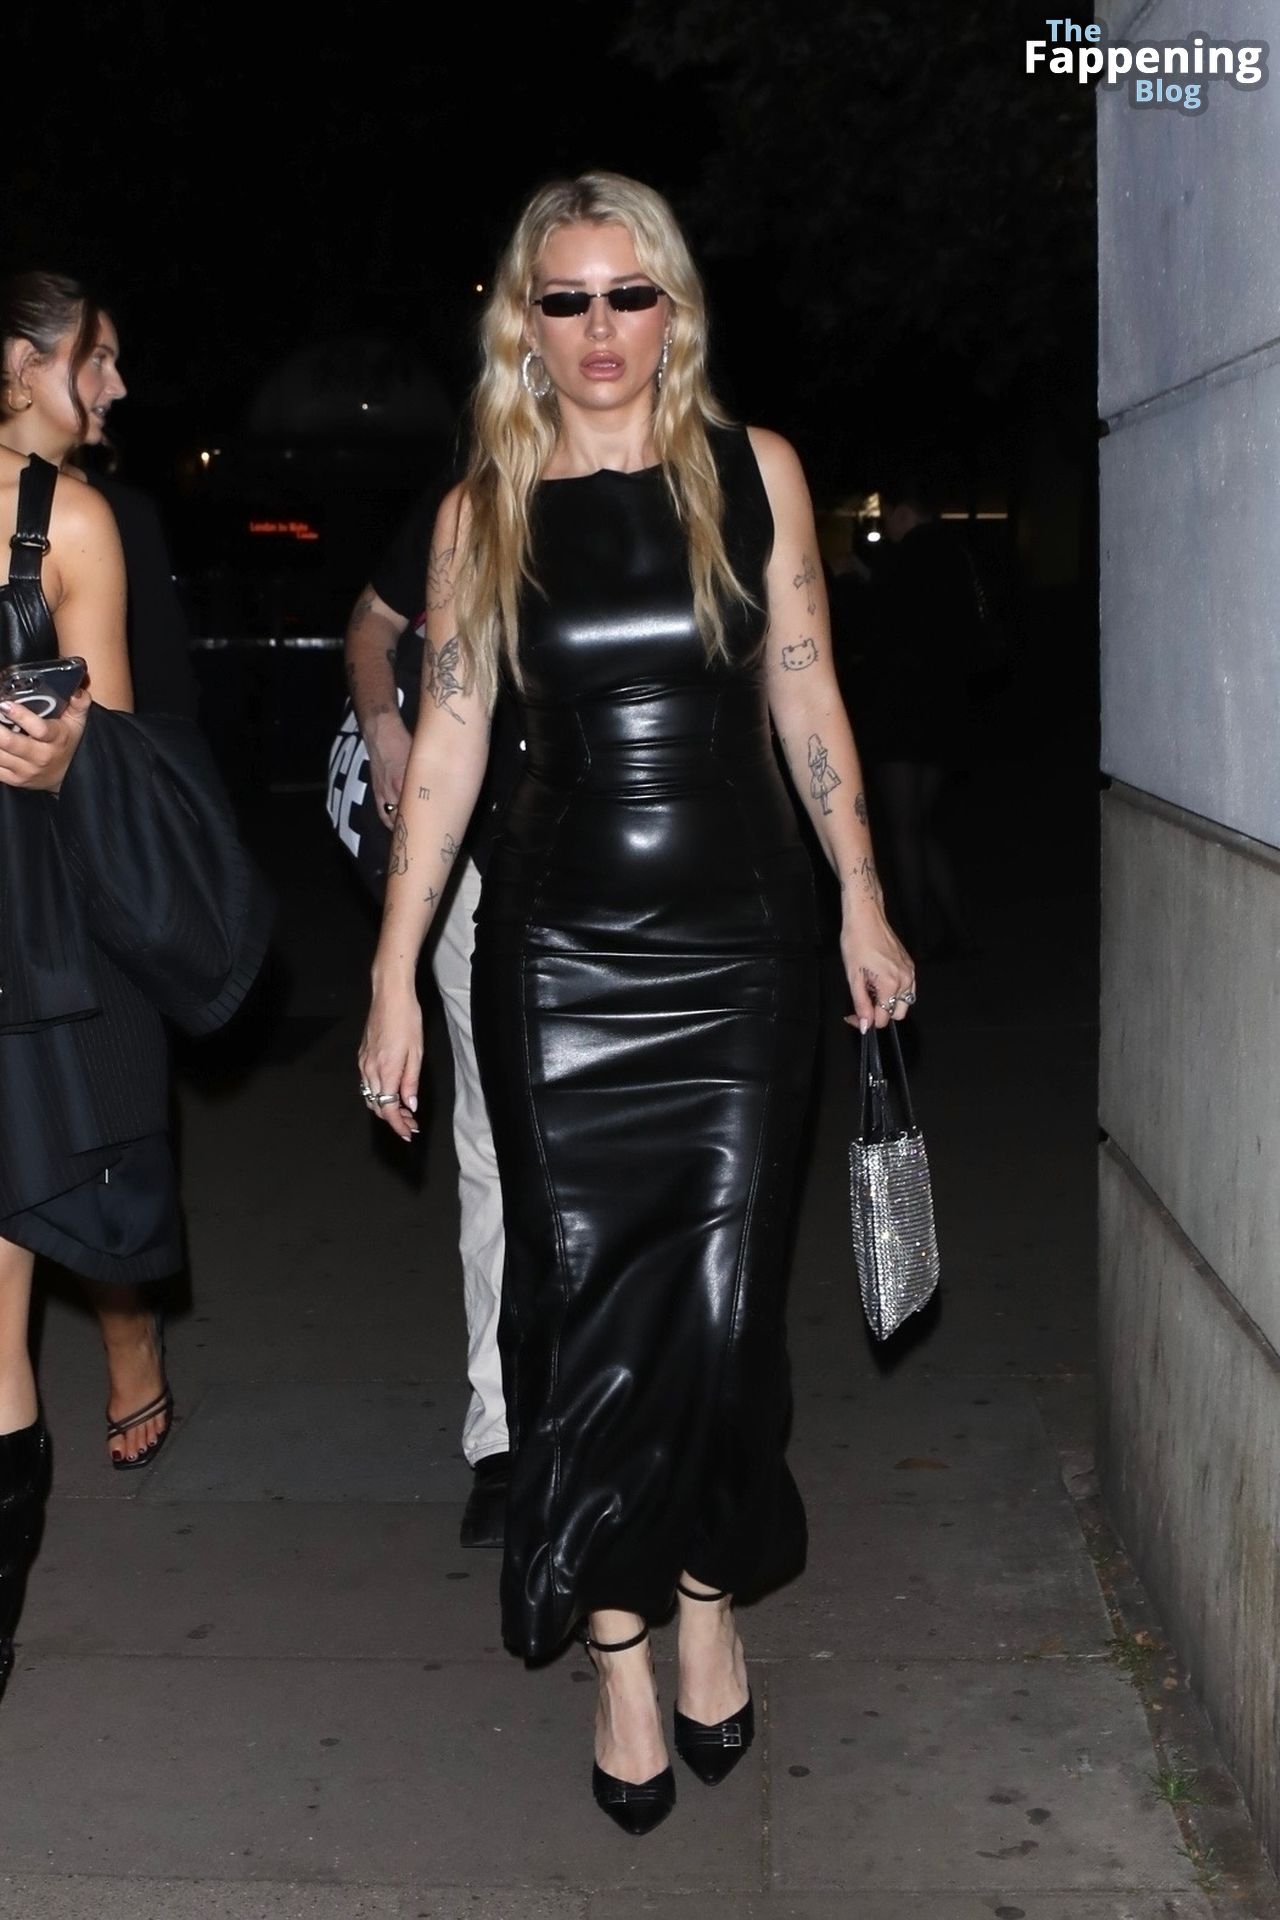 Lottie Moss Looks Hot in a Leather Dress as She Exits Rita Ora’s Fashion Event in London (68 Photos)